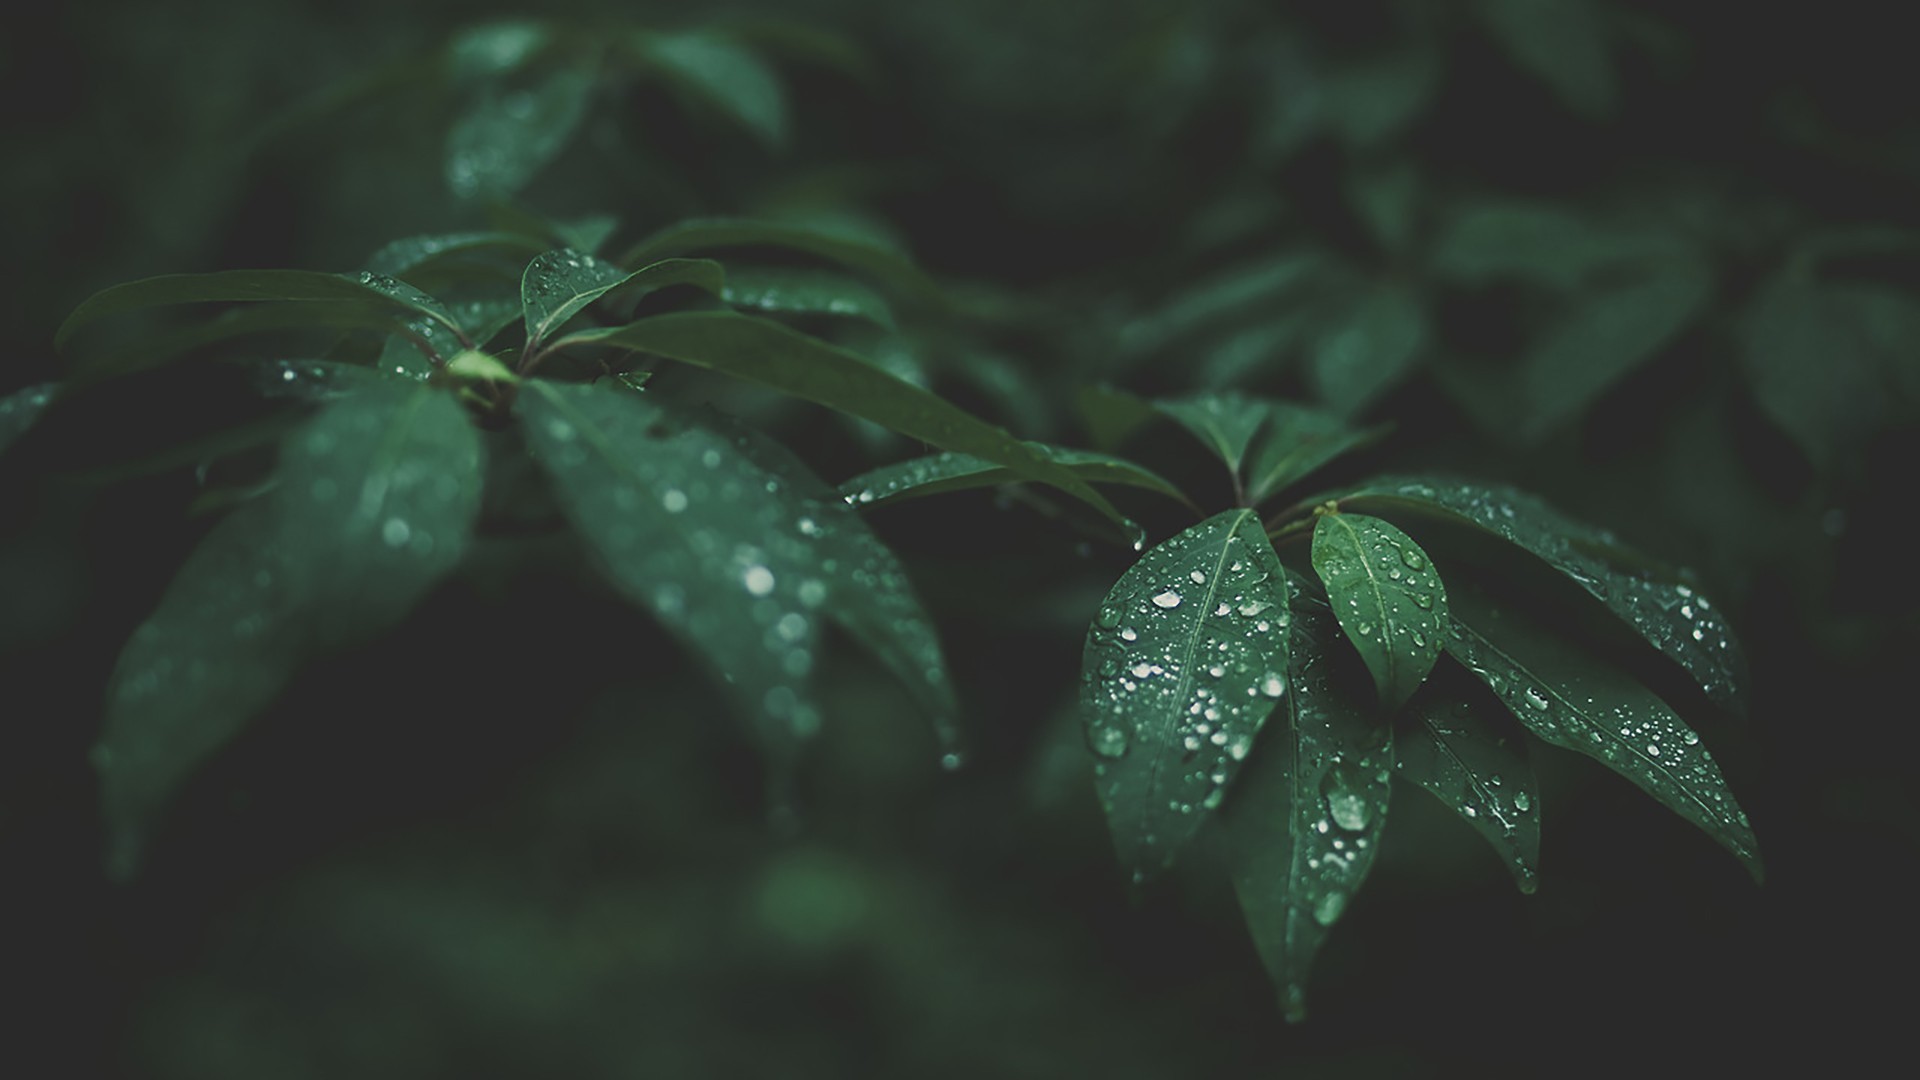 General 1920x1080 leaves water drops blurred photography nature green plants